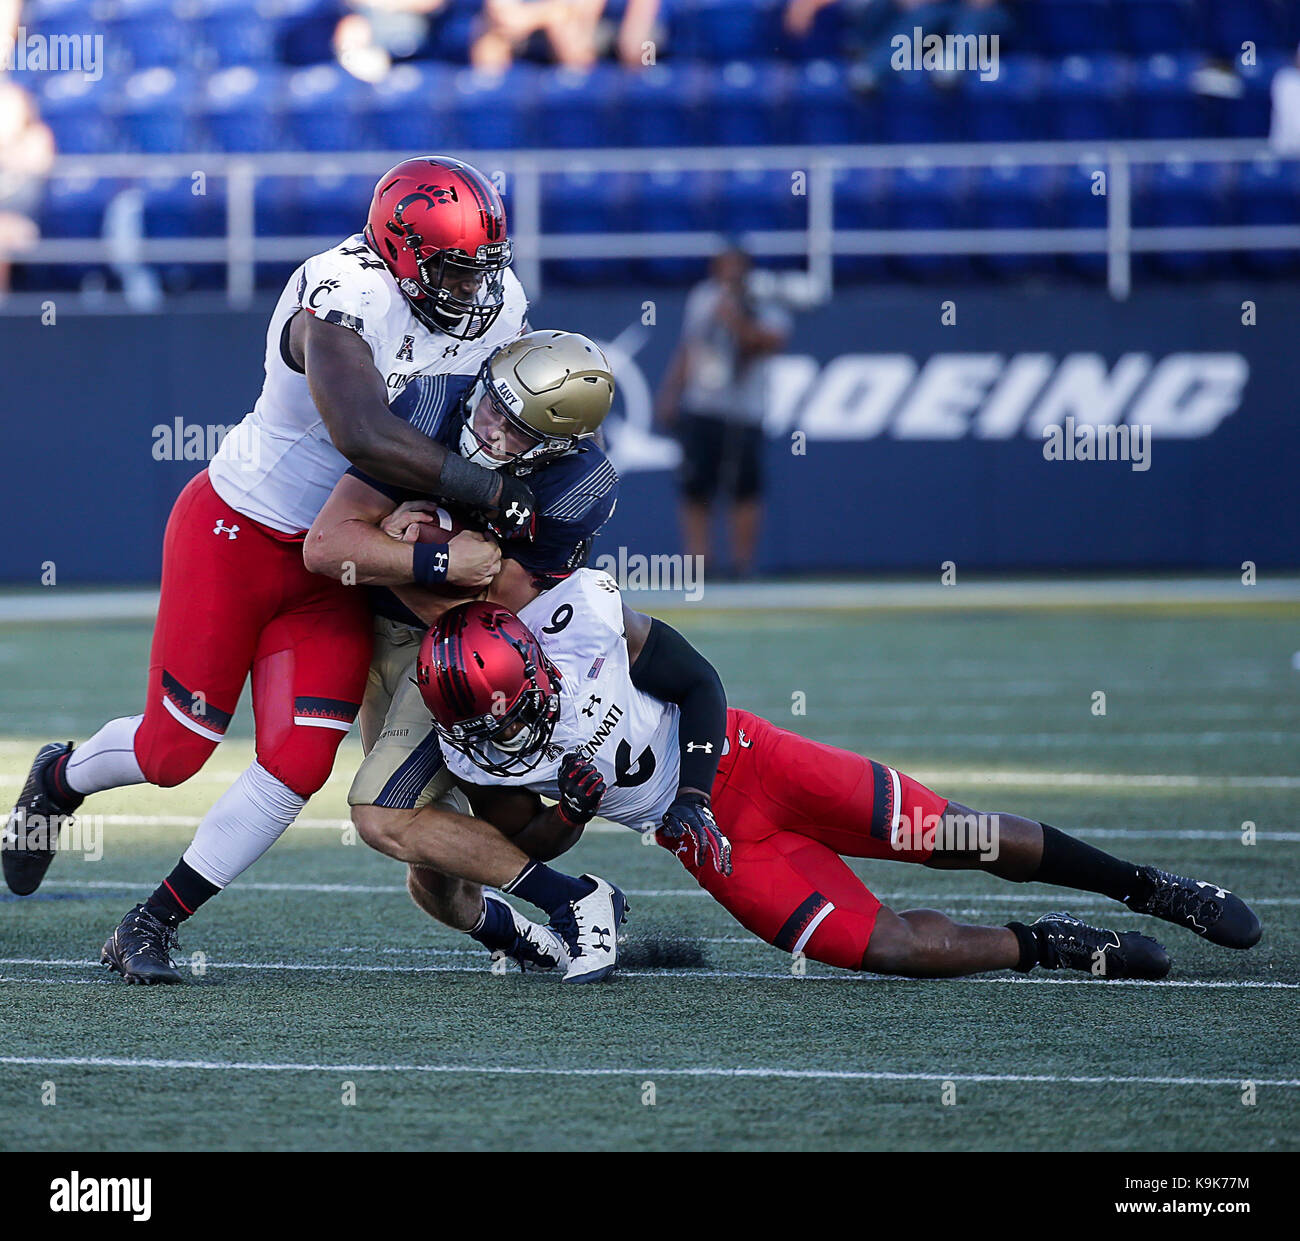 Annapolis, Maryland, USA. 23rd Sep, 2017. United States Naval Academy QB #9 Zach Abey is tackled by Cincinnati Bearcats LB #6 Perry Young and Cincinnati Bearcats DE #44 Marquise Copeland during a NCAA football game between the United States Naval Academy Midshipmen and the Cincinnati Bearcats at Navy Marine Corp Stadium in Annapolis, Maryland. Justin Cooper/CSM/Alamy Live News Stock Photo